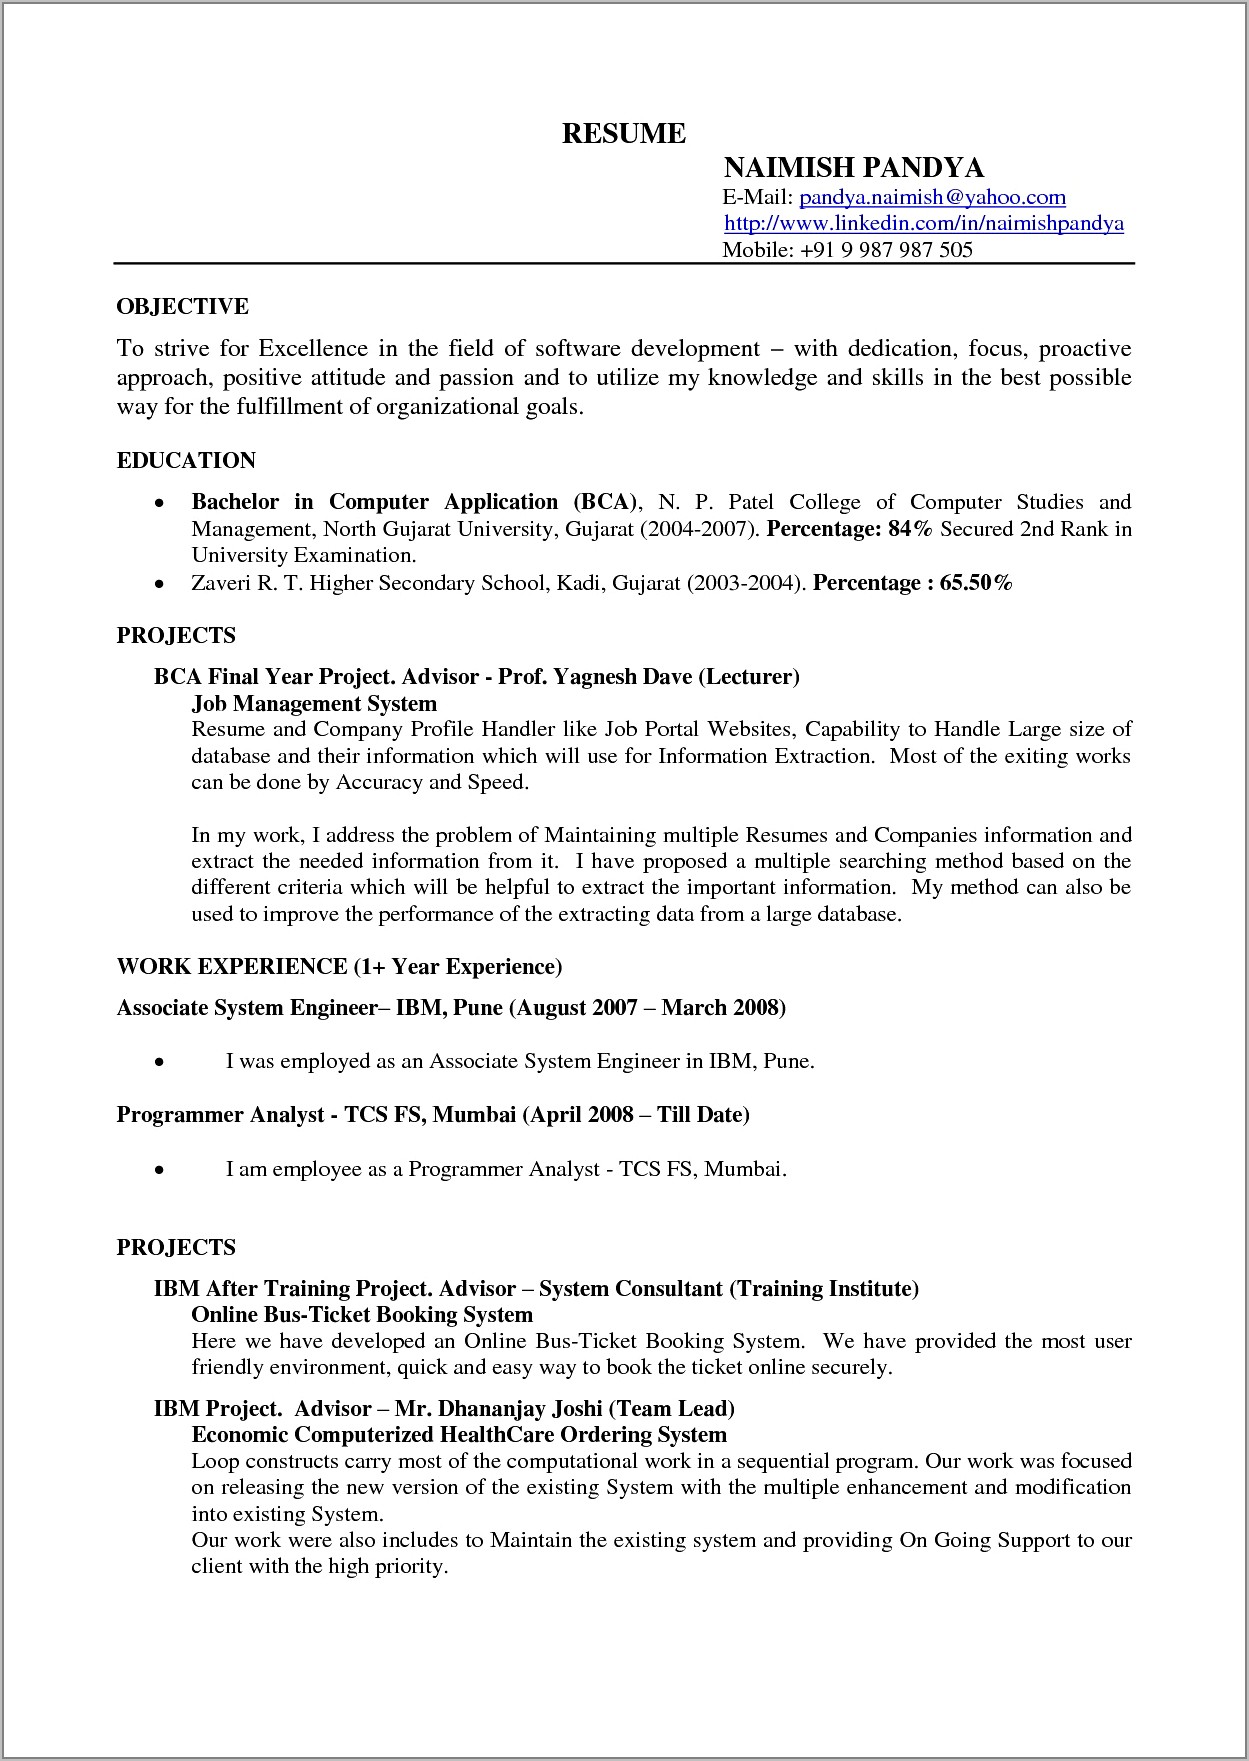 Format Of Resumes For Jobs